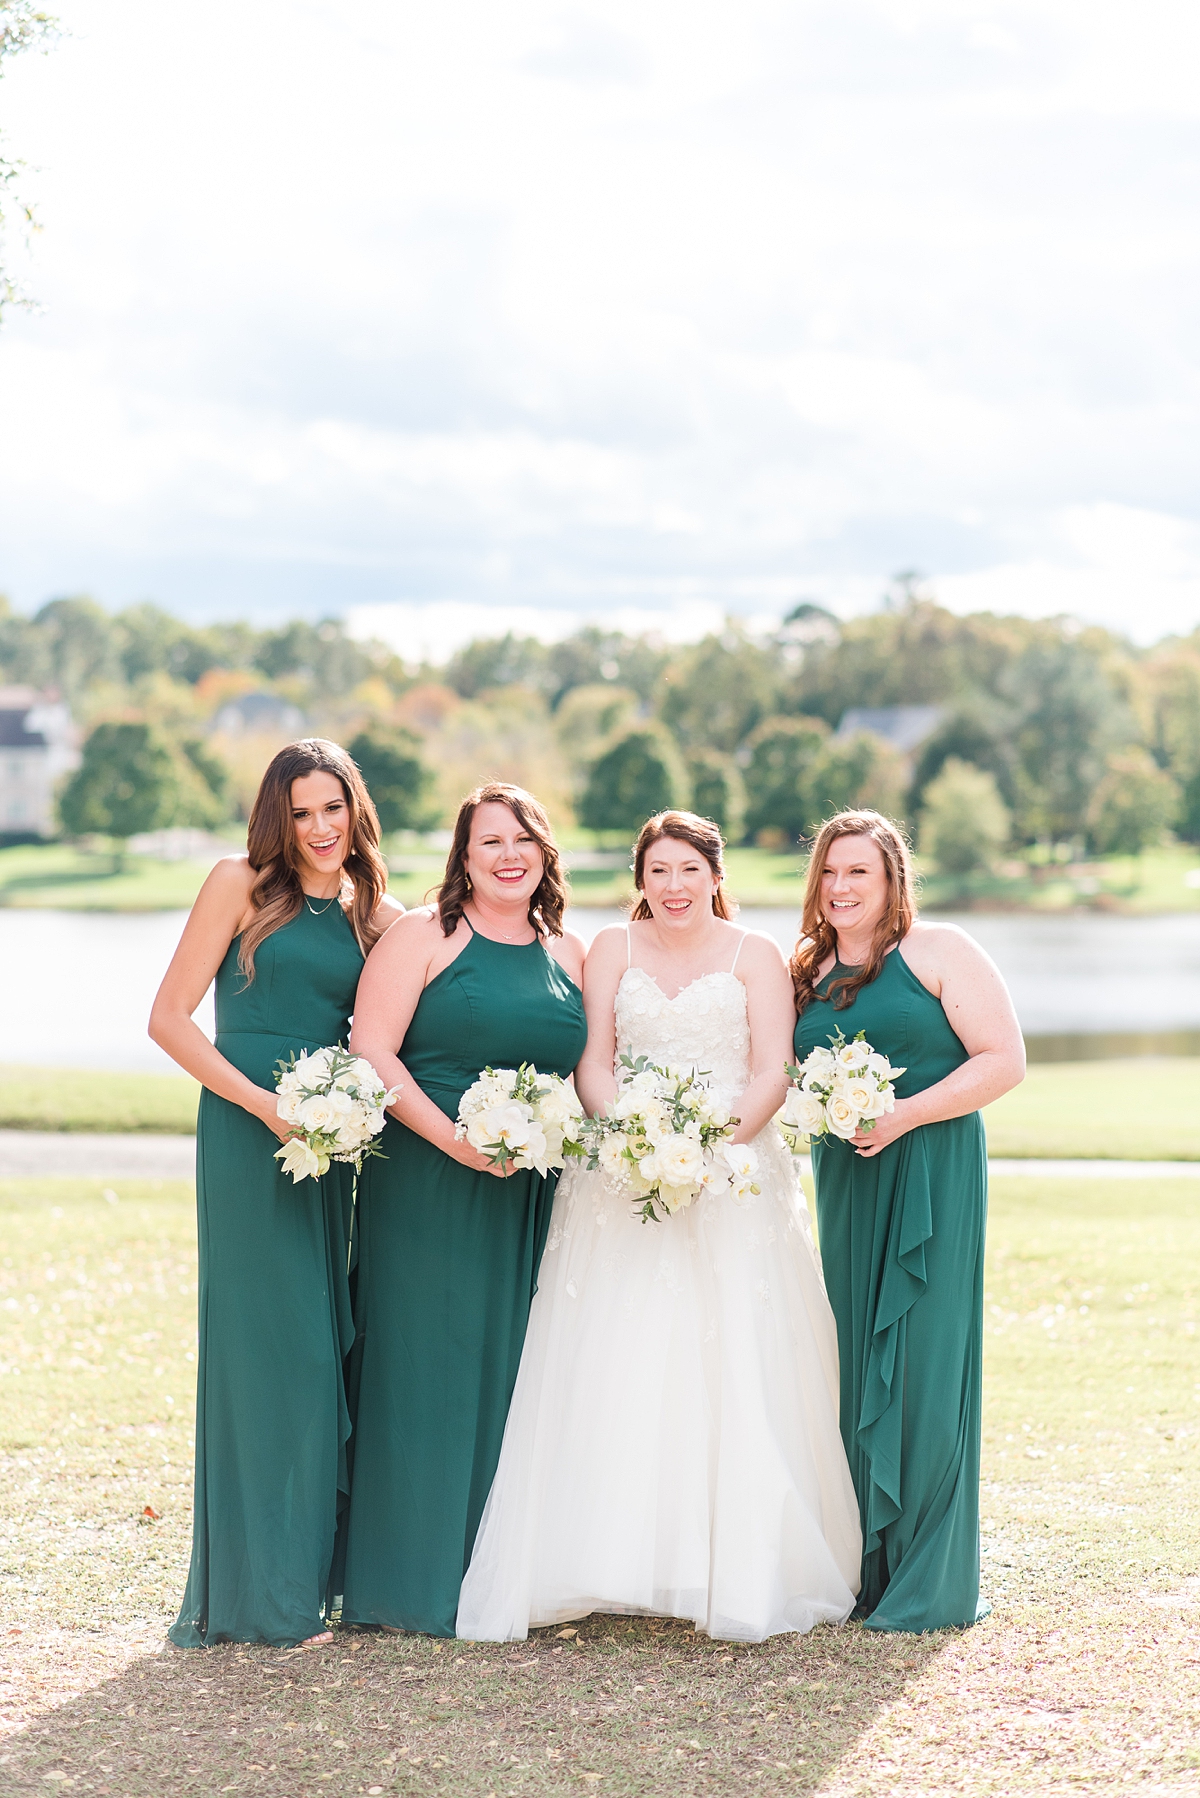 Bridal Party Portraits at The Dominion Club. Wedding Photography by Richmond Wedding Photographer Kailey Brianne Photography.